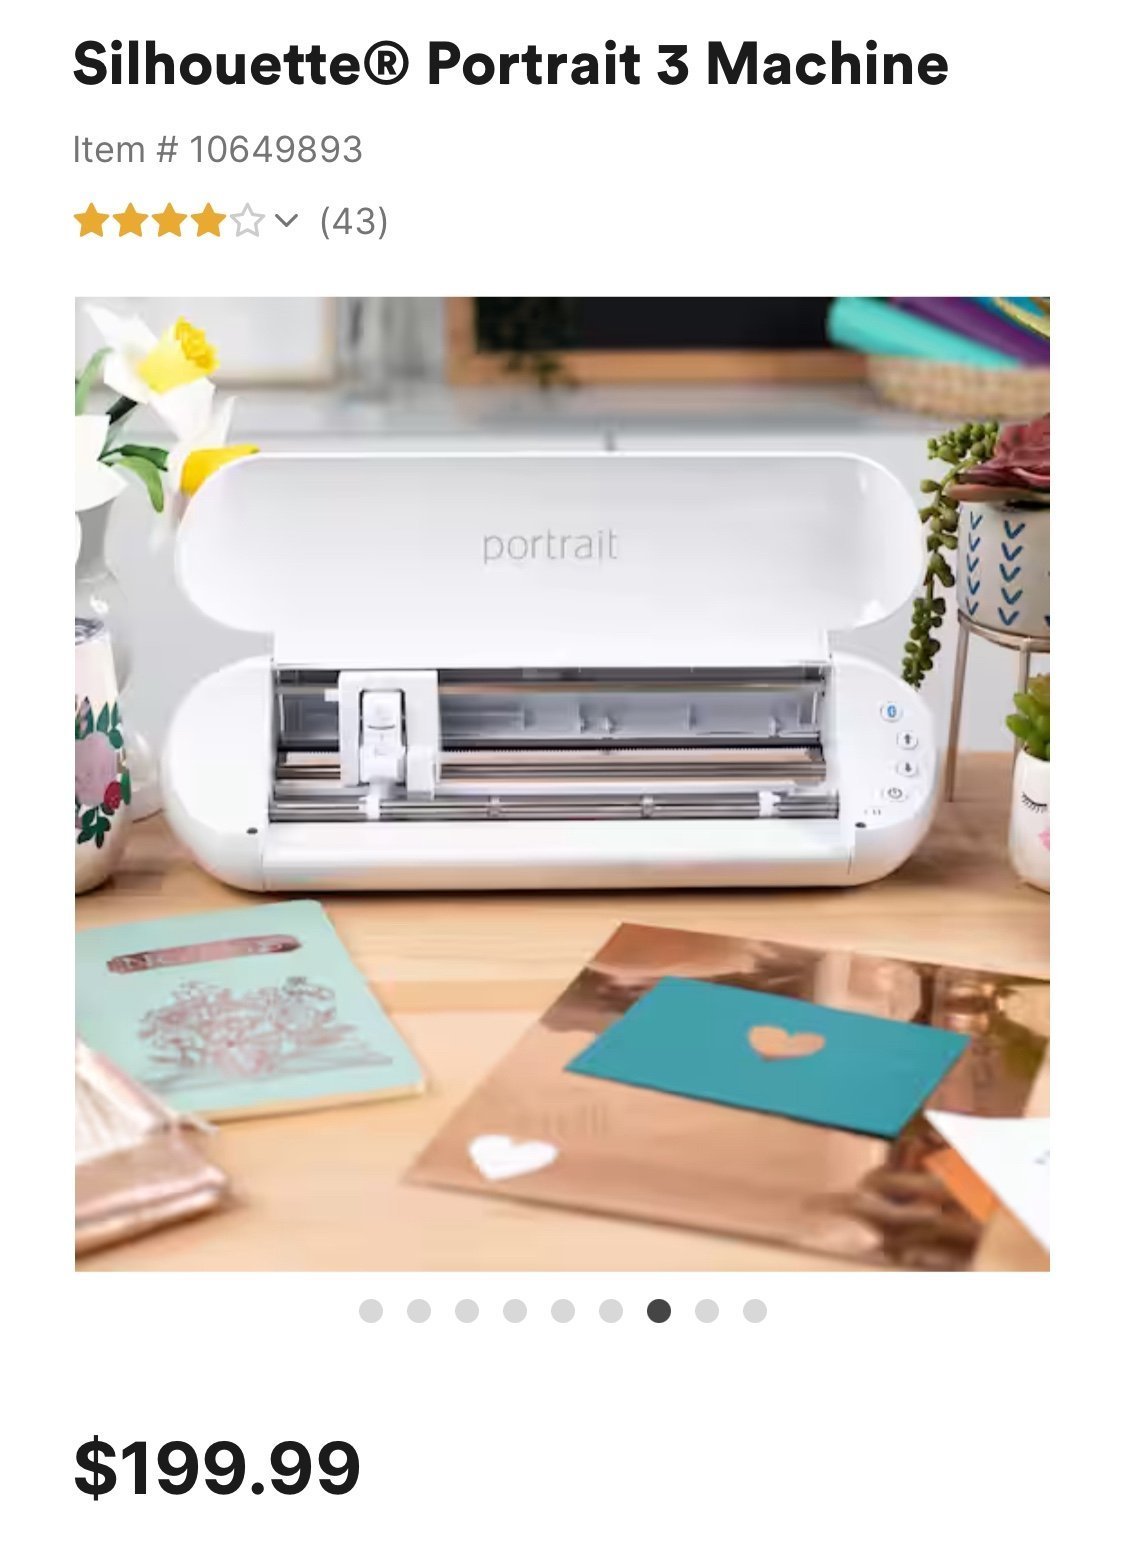 INCLUDES: Cricut 3, Silhouette Portrait & INTUOS PAD & PEN. SEE BELOW! 24Ag7w1uD